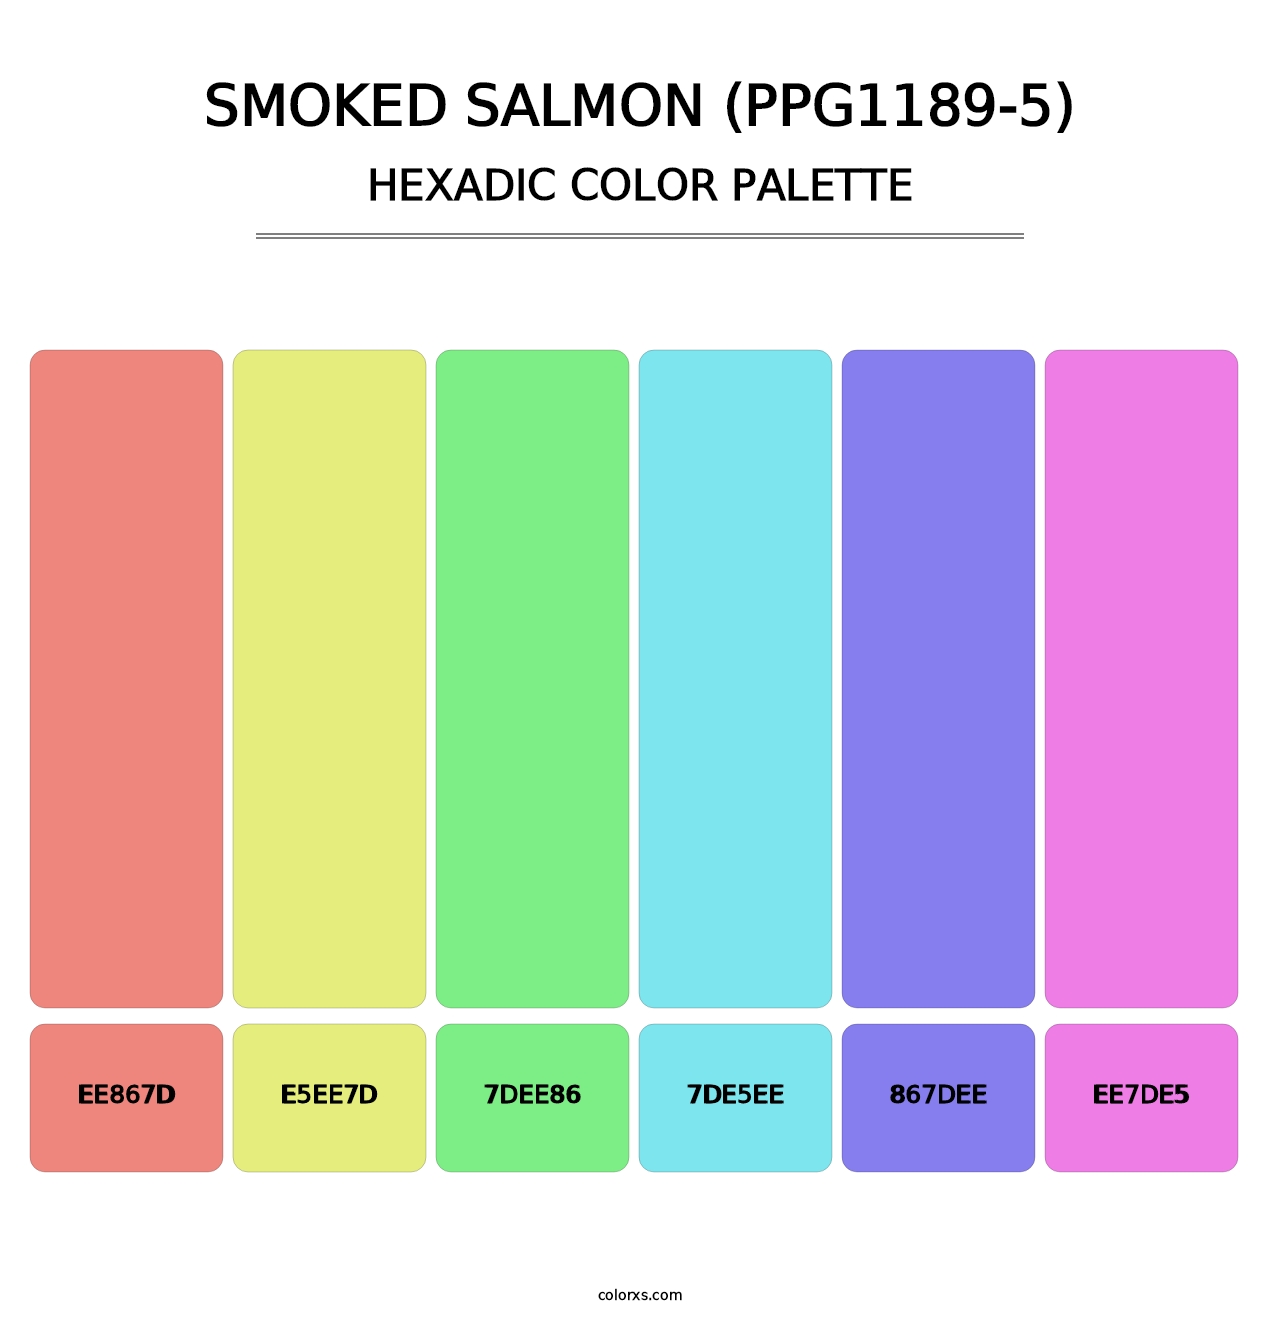 Smoked Salmon (PPG1189-5) - Hexadic Color Palette